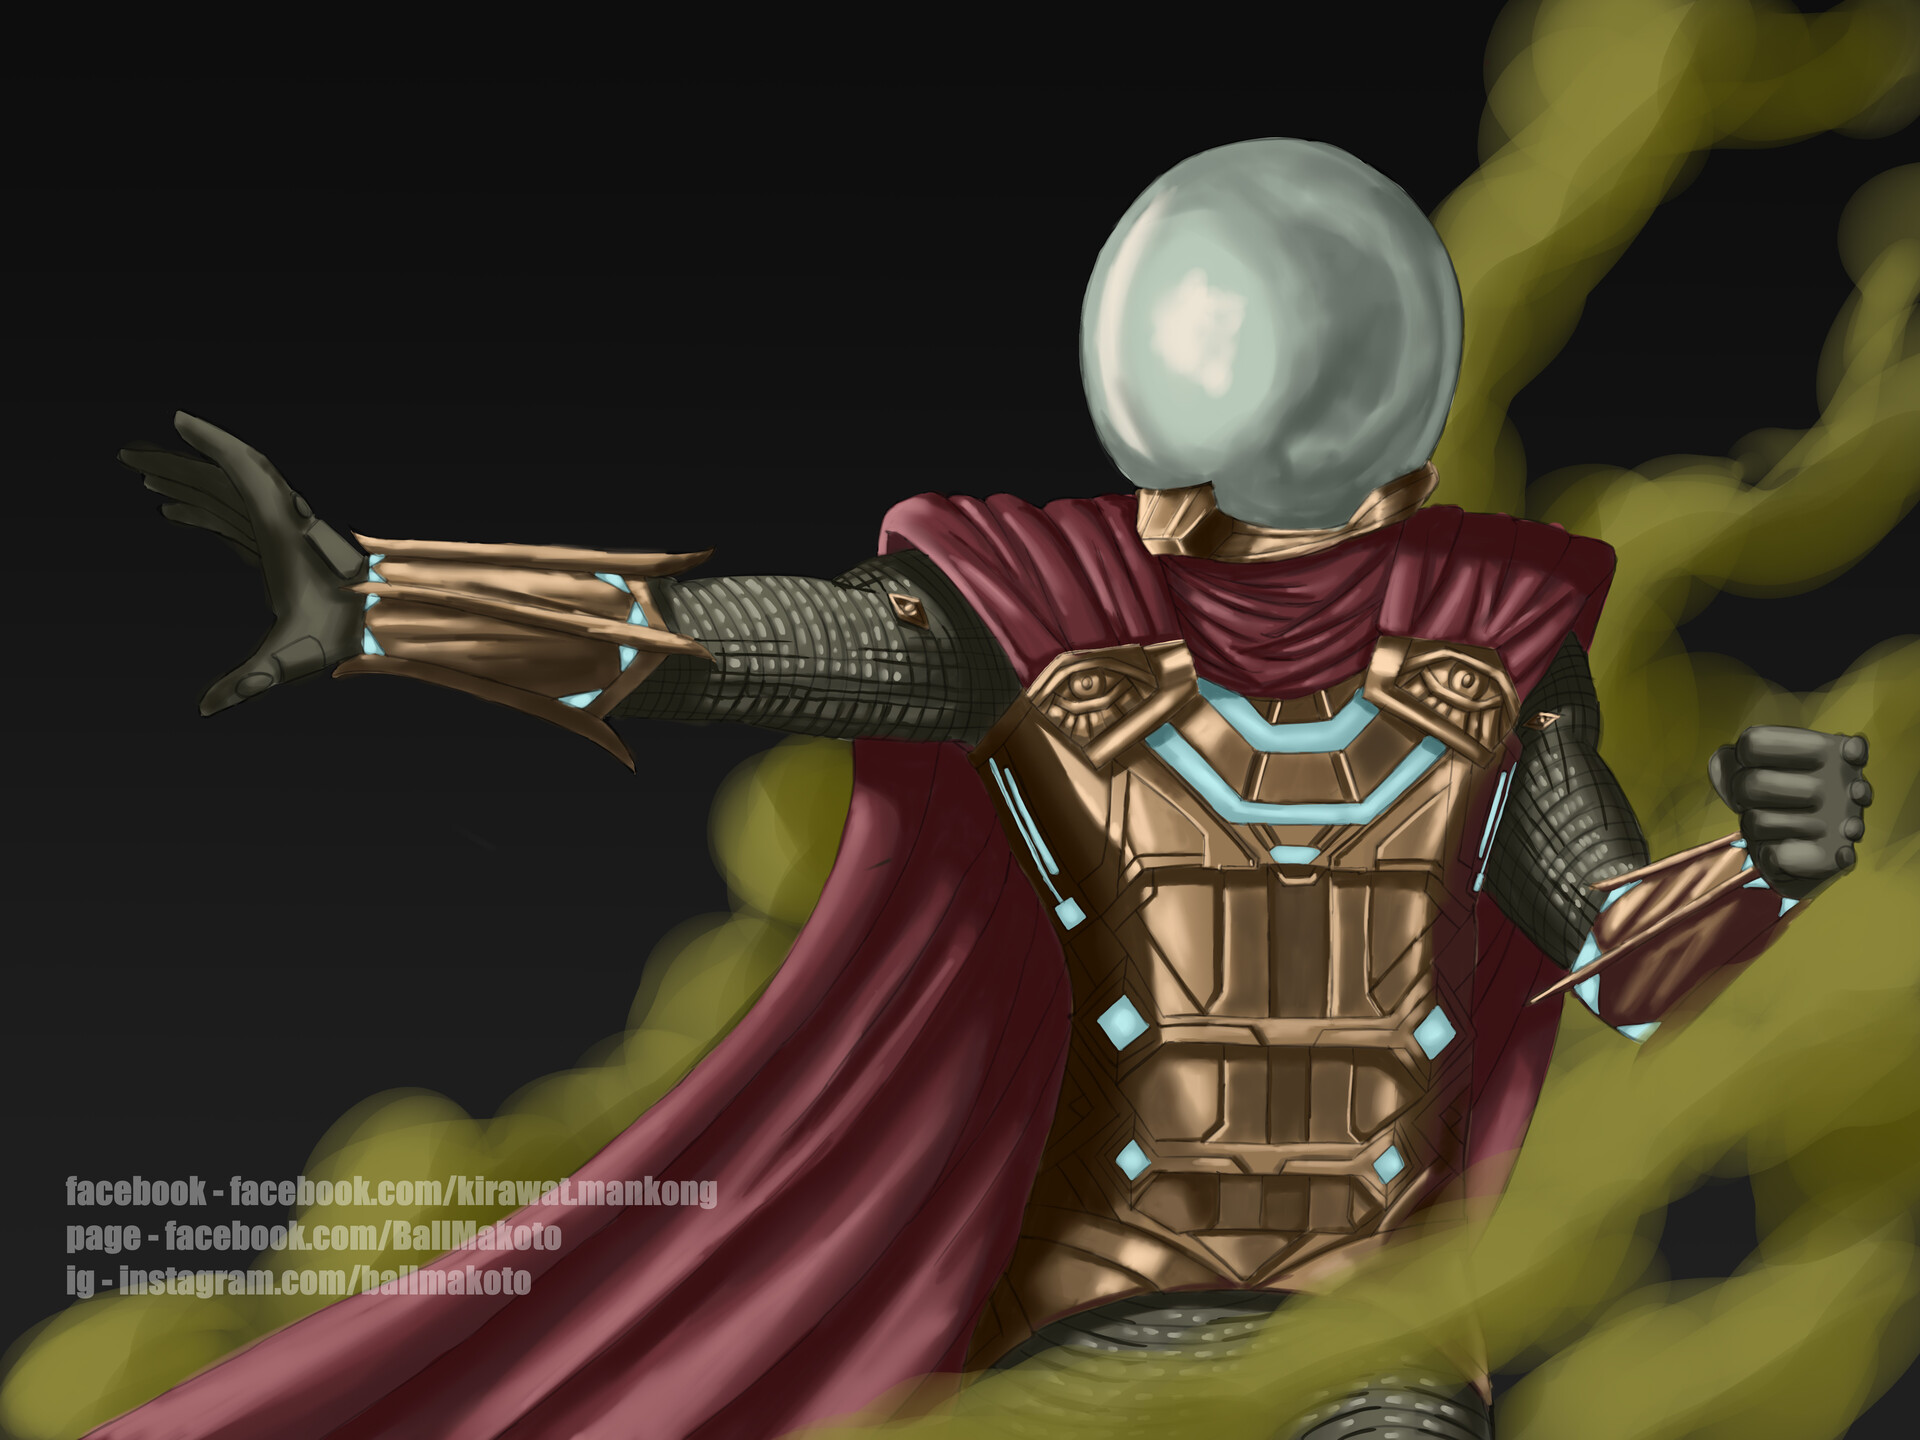 Mysterio Marvel Wallpapers